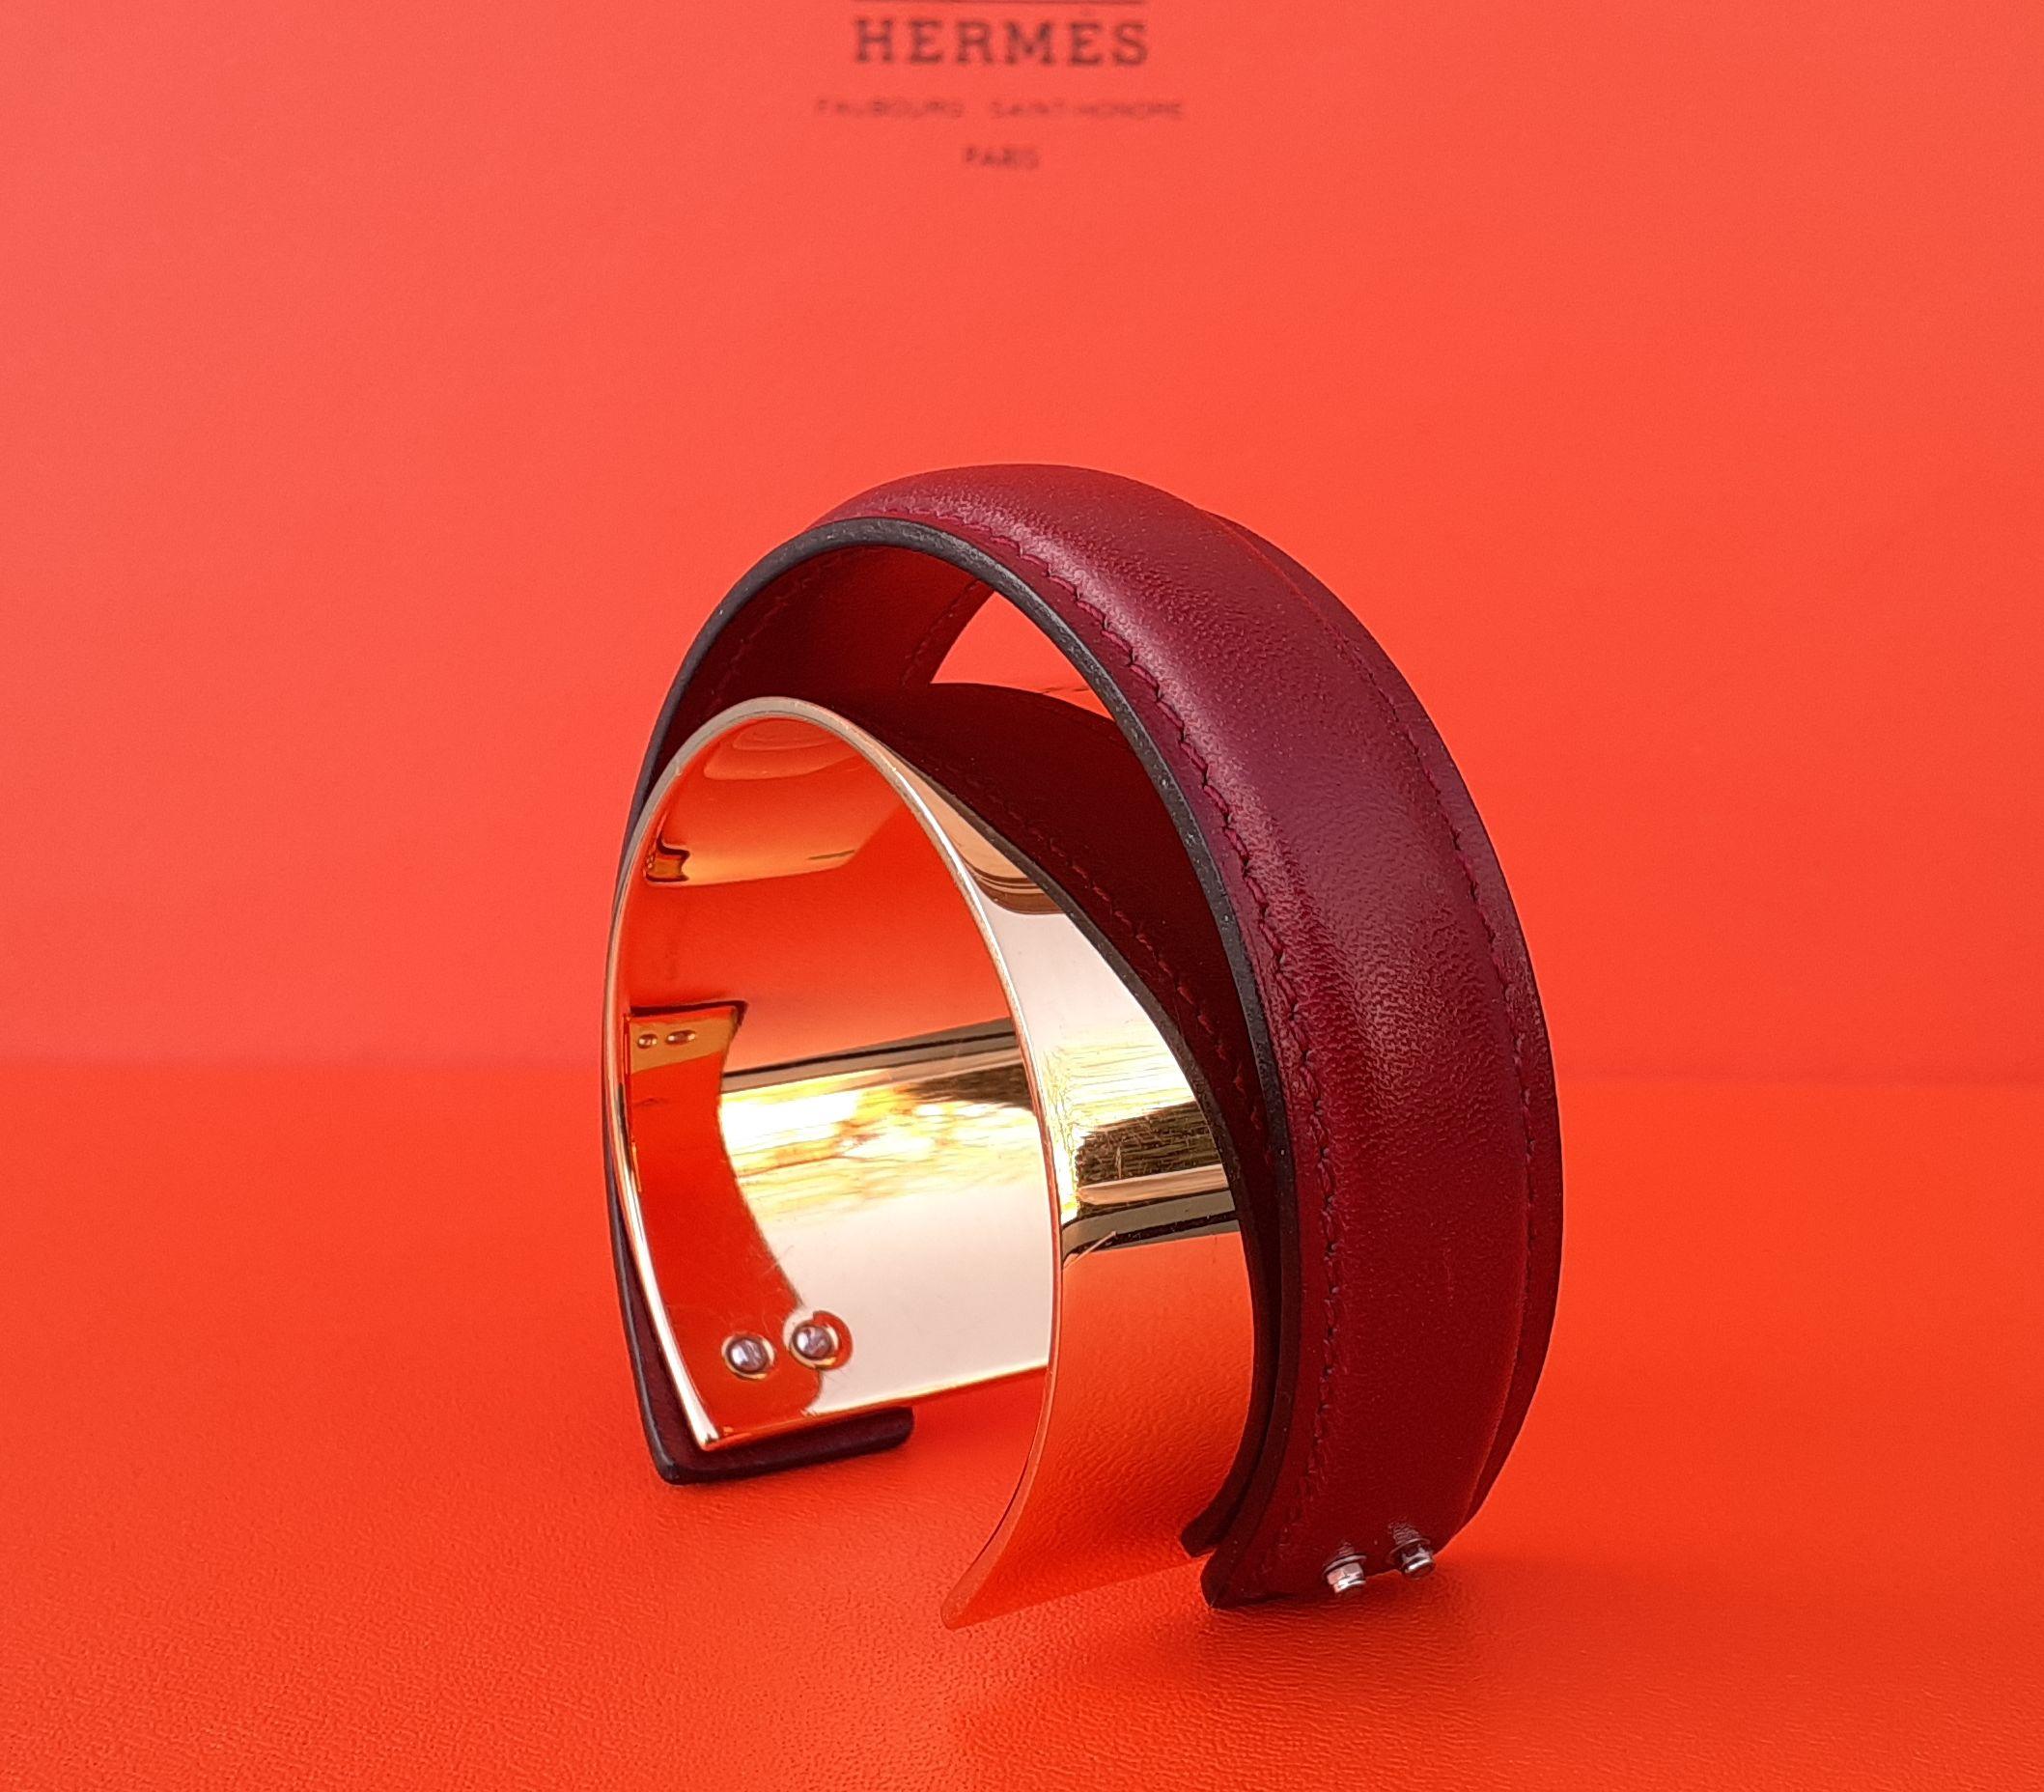 Exceptional Hermès Cuff Bracelet Golden Hdw and Rouge H Box Leather Size L For Sale 6